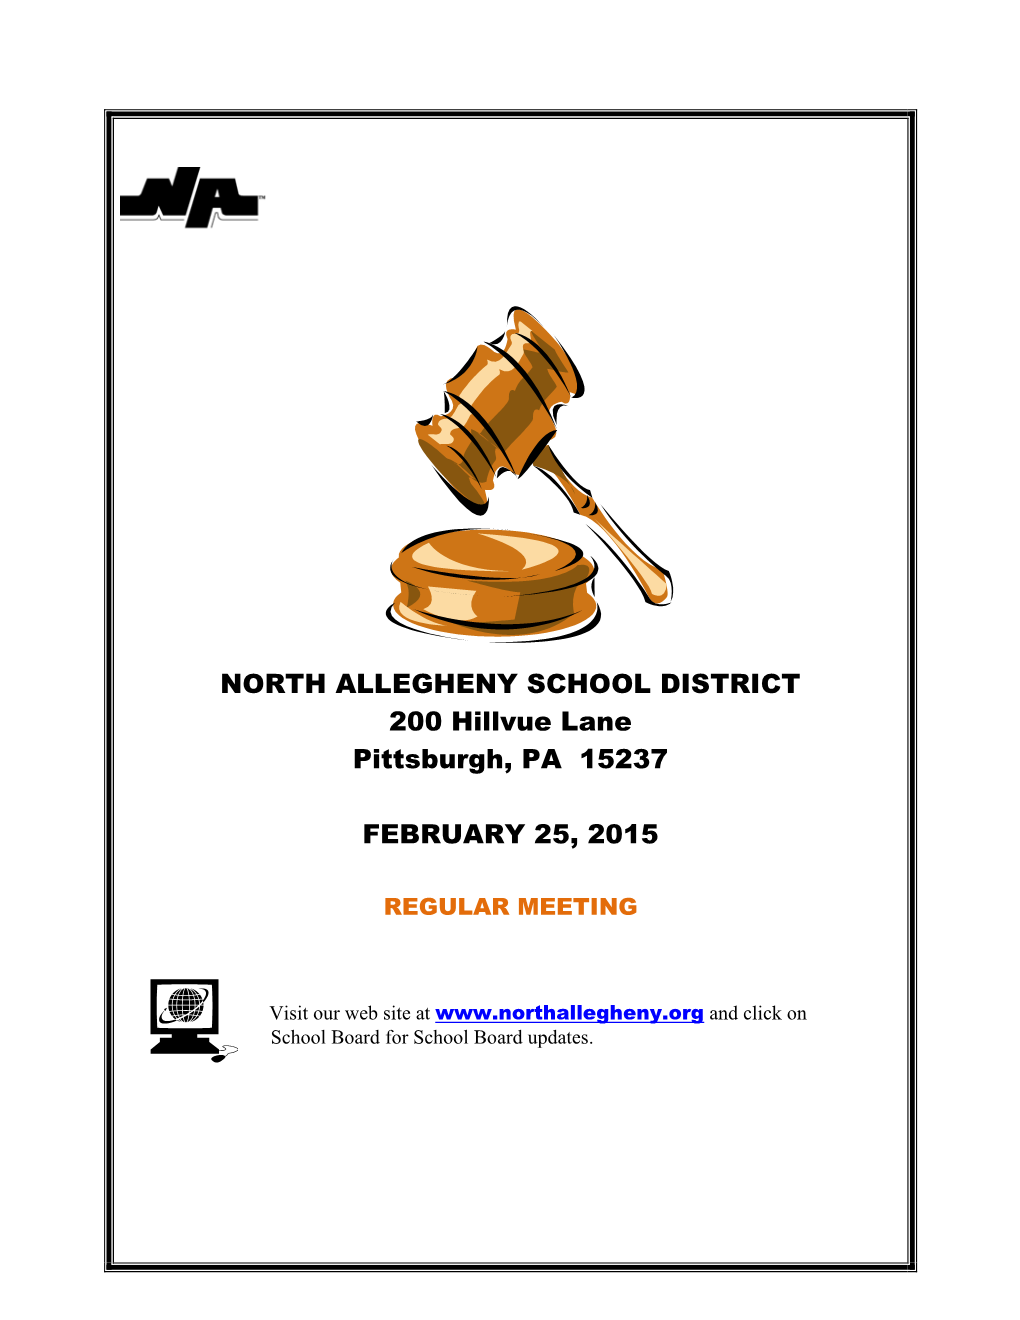 NORTH ALLEGHENY SCHOOL DISTRICT 200 Hillvue Lane Pittsburgh, PA 15237